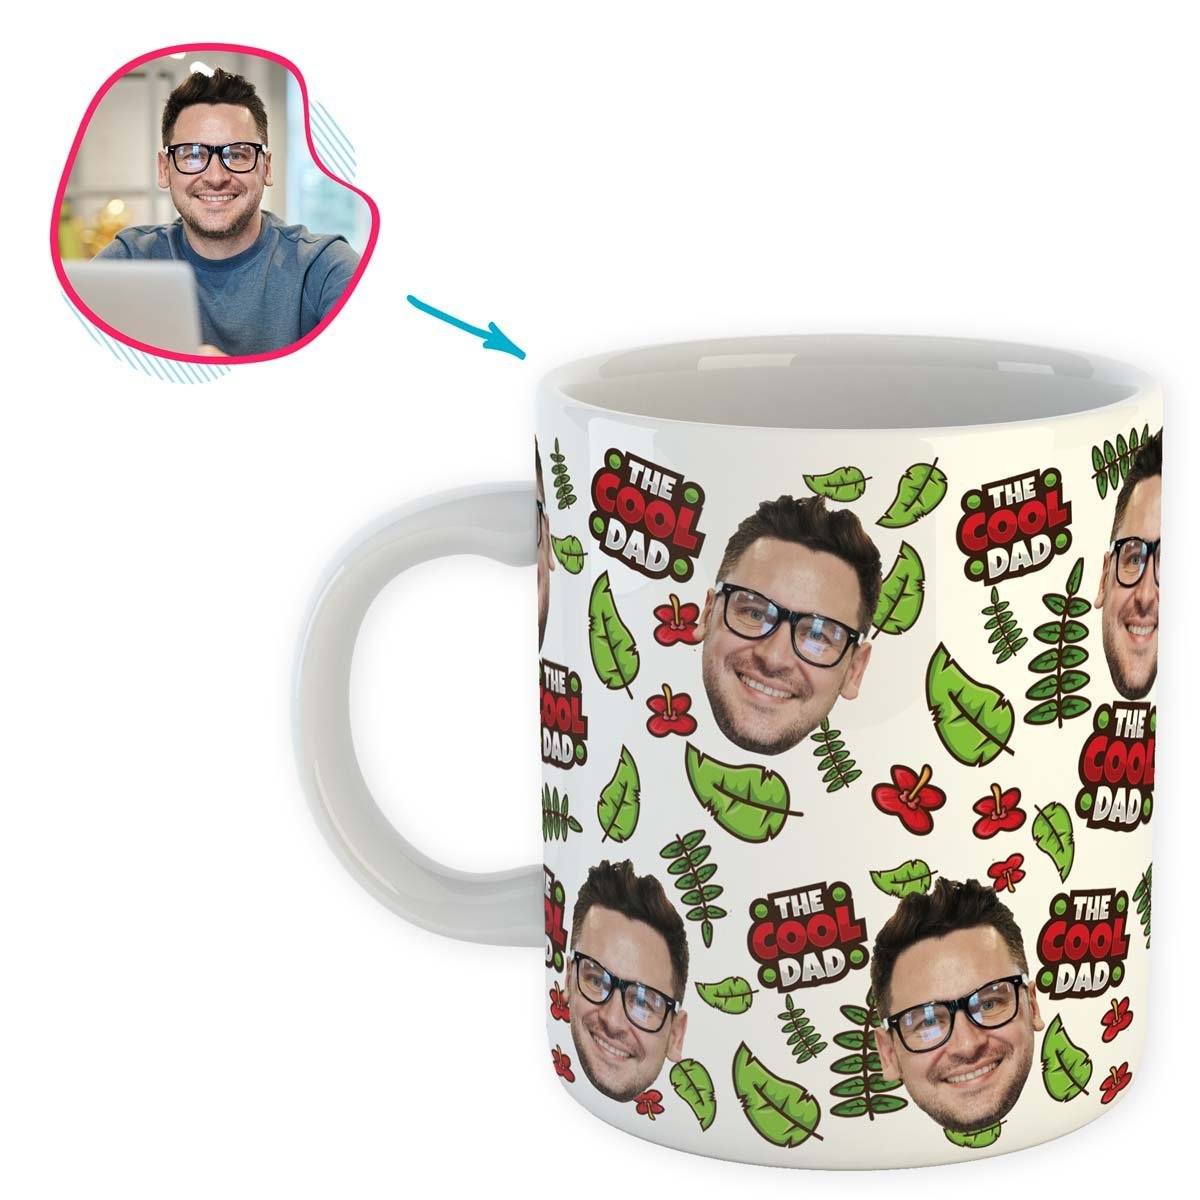 white The Cool Dad mug personalized with photo of face printed on it